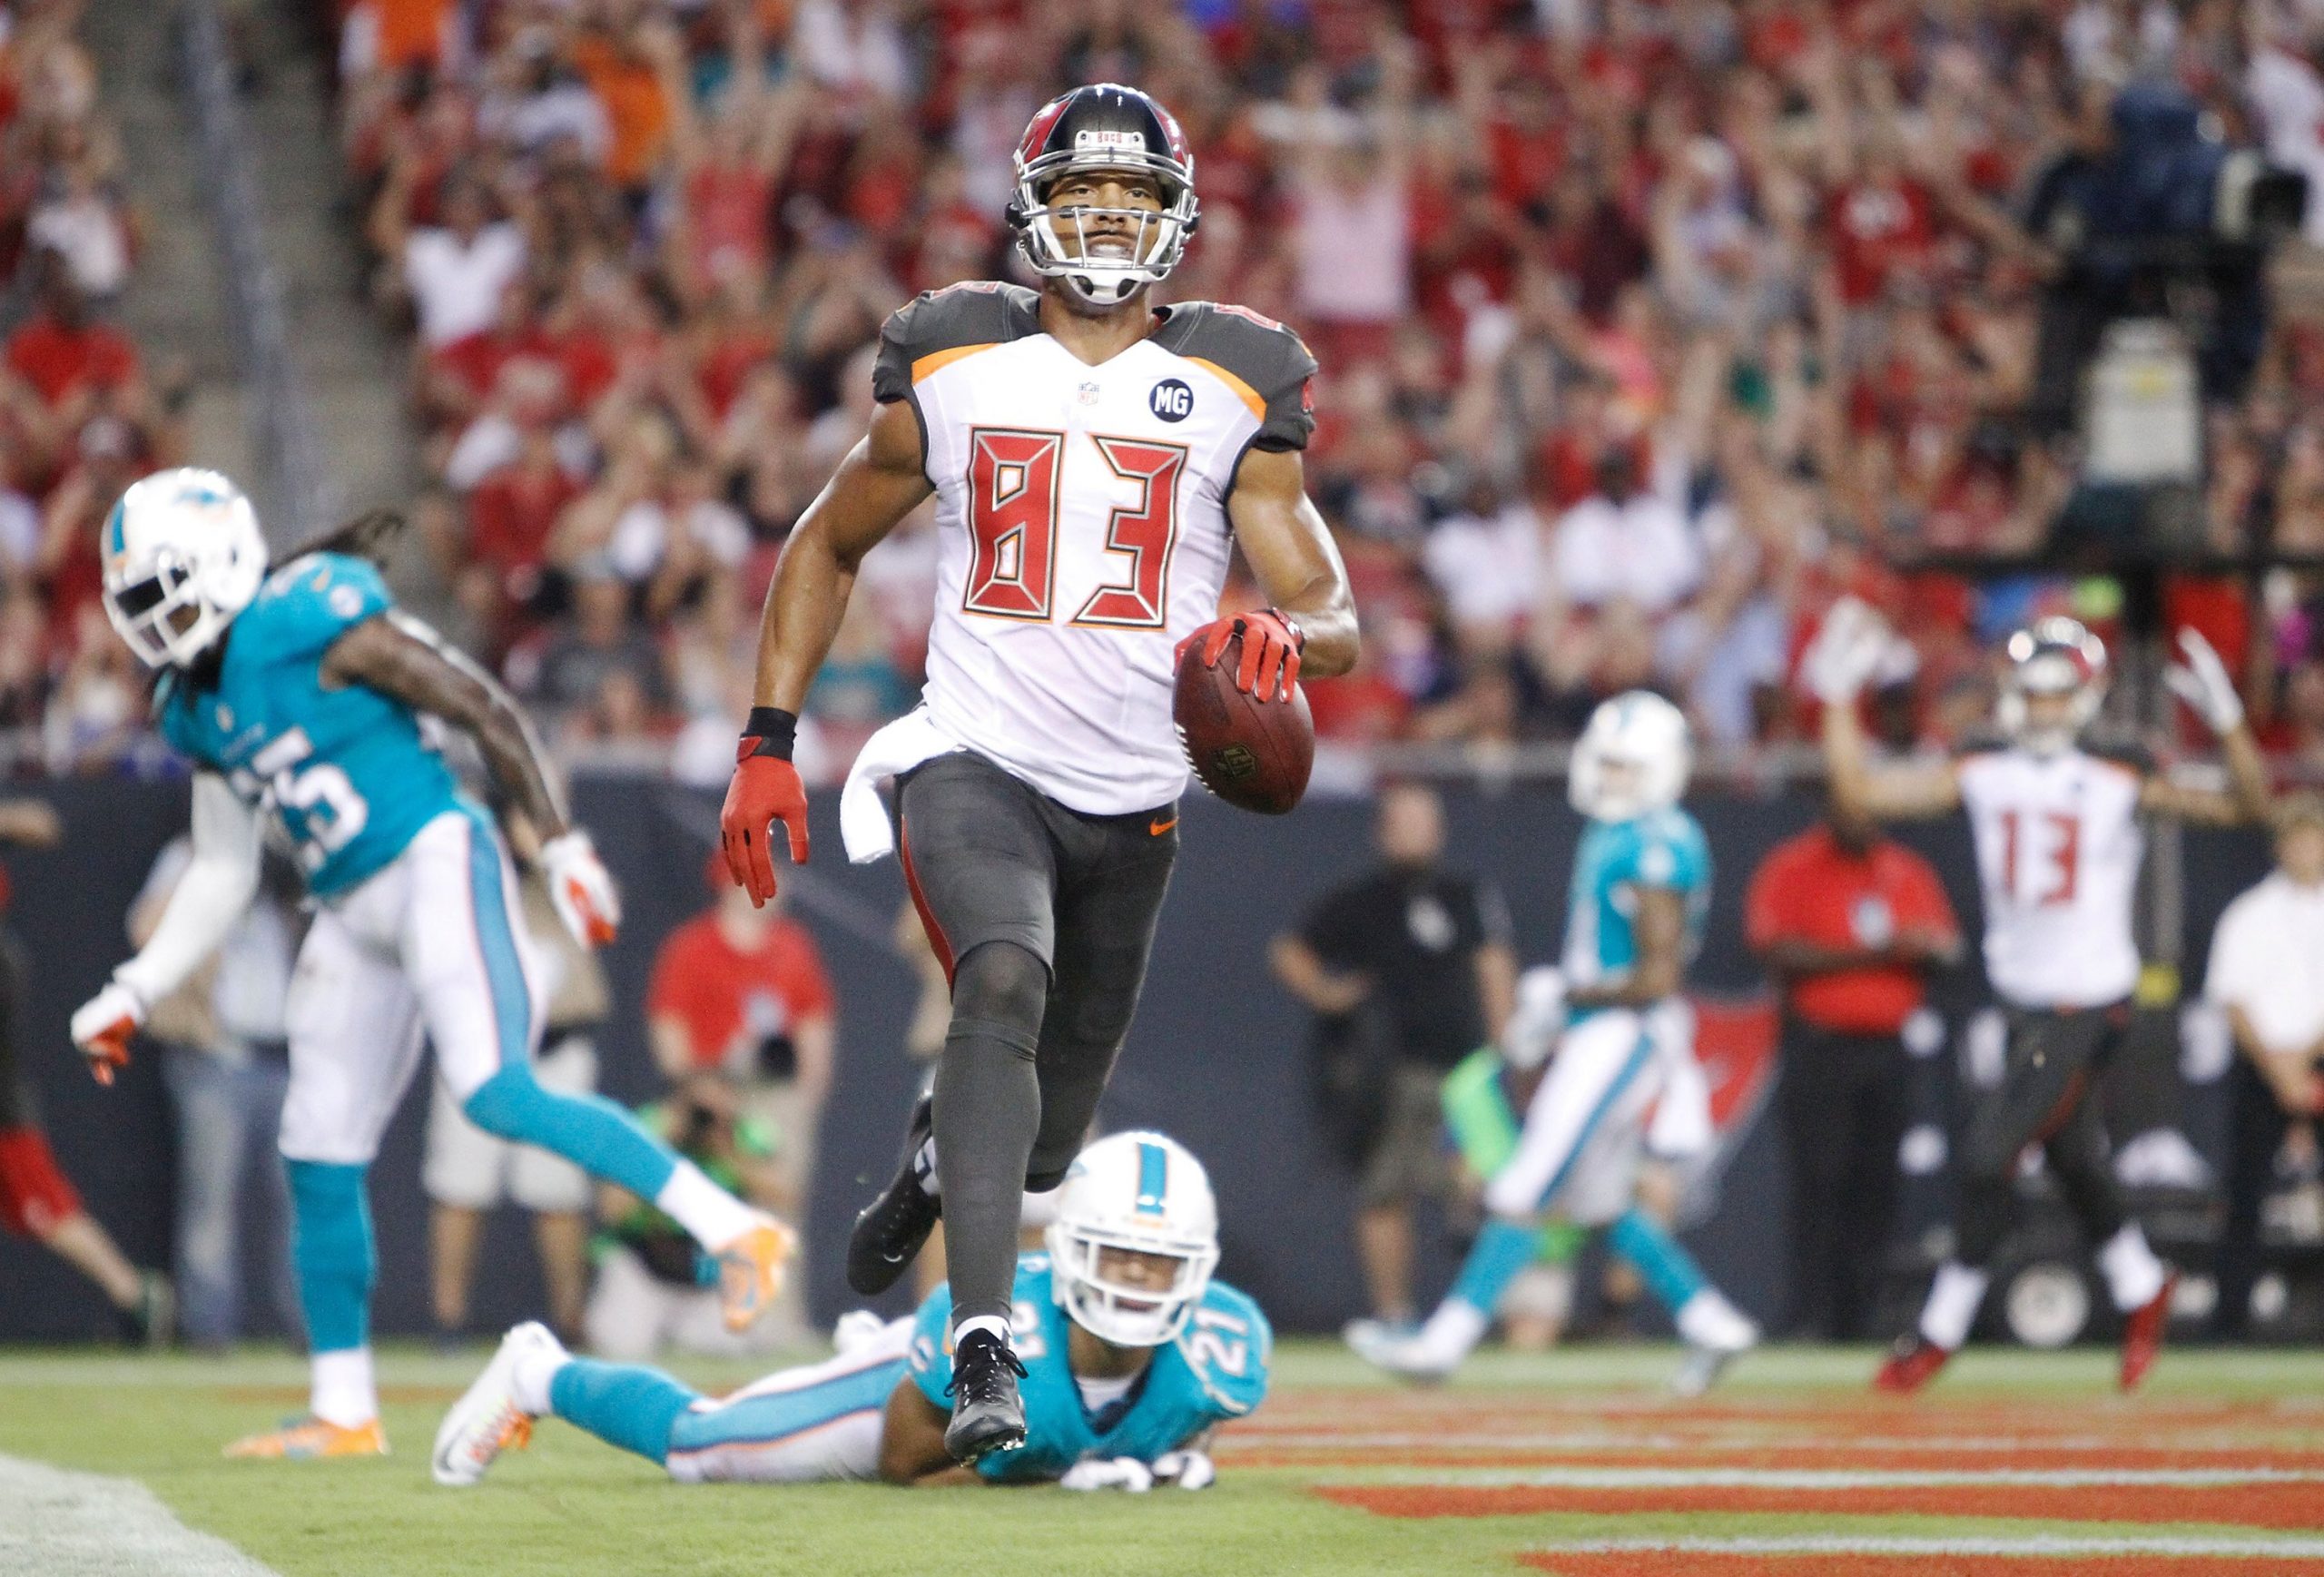 Tampa Bay Buccaneers wide receiver Vincent Jackson (83) scores a 7-yard touchdown on a pass from Josh McCown against the Miami Dolphins at Raymond James Stadium in Tampa, Fla., on Saturday, August 16, 2014. (Brendan Fitterer/Tampa Bay Times/TNS)